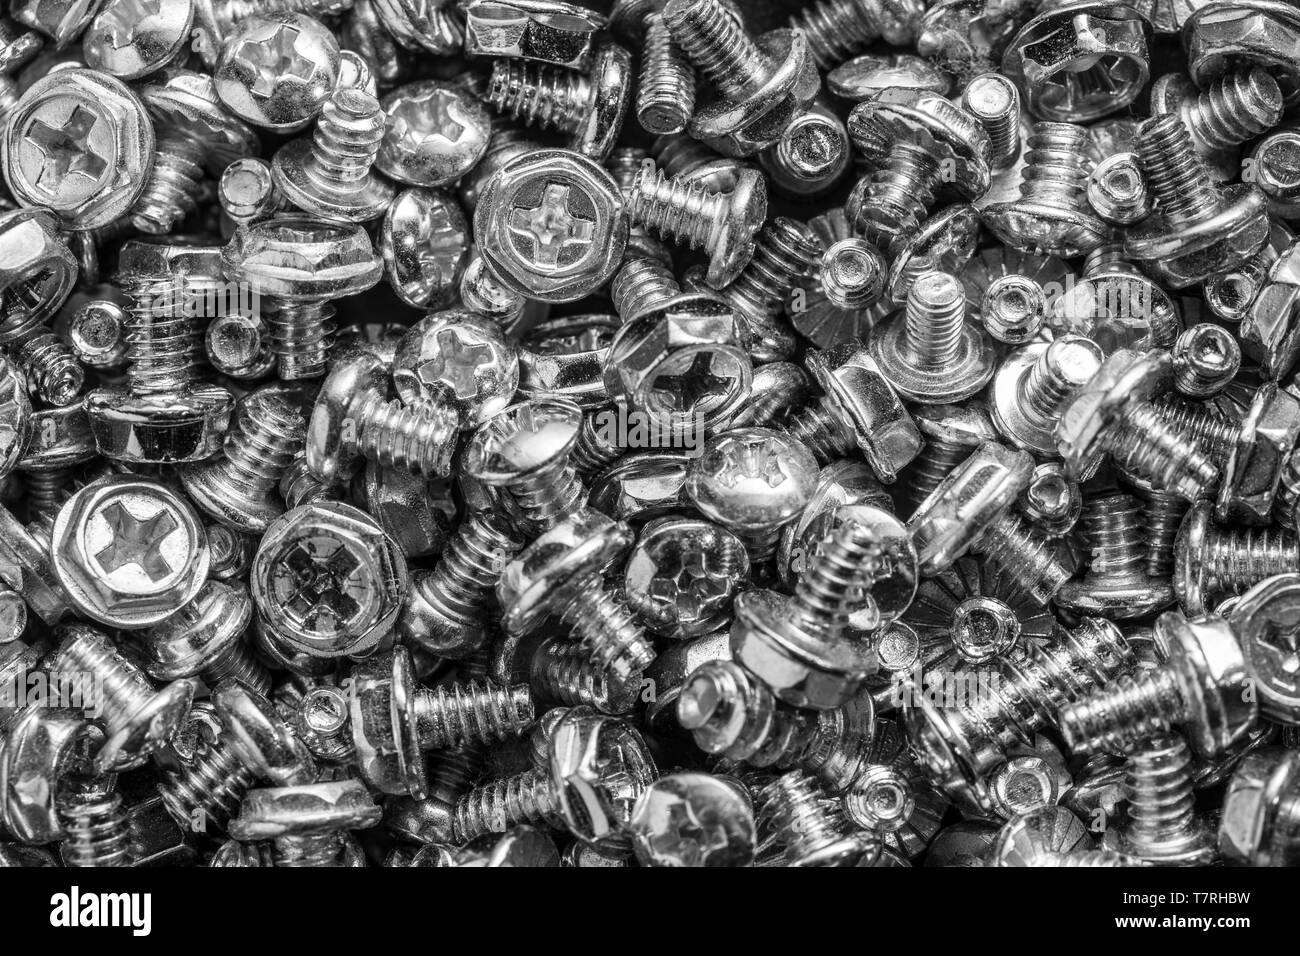 Texture of silver computer botls or screws Stock Photo